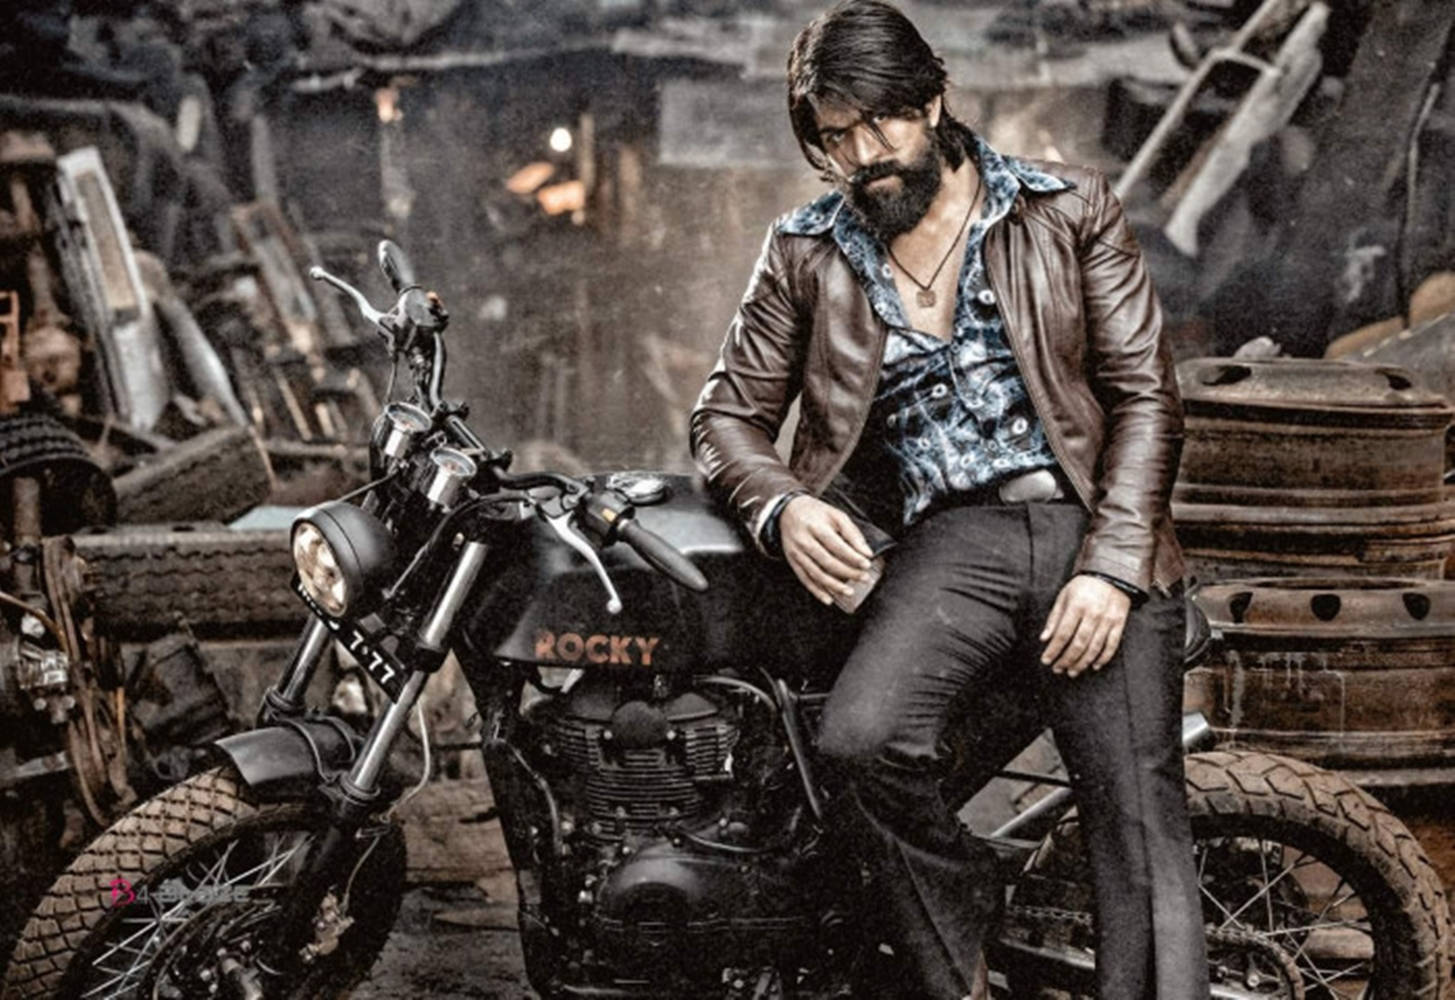 Kgf Bike Chapter 2 Movie Poster Background